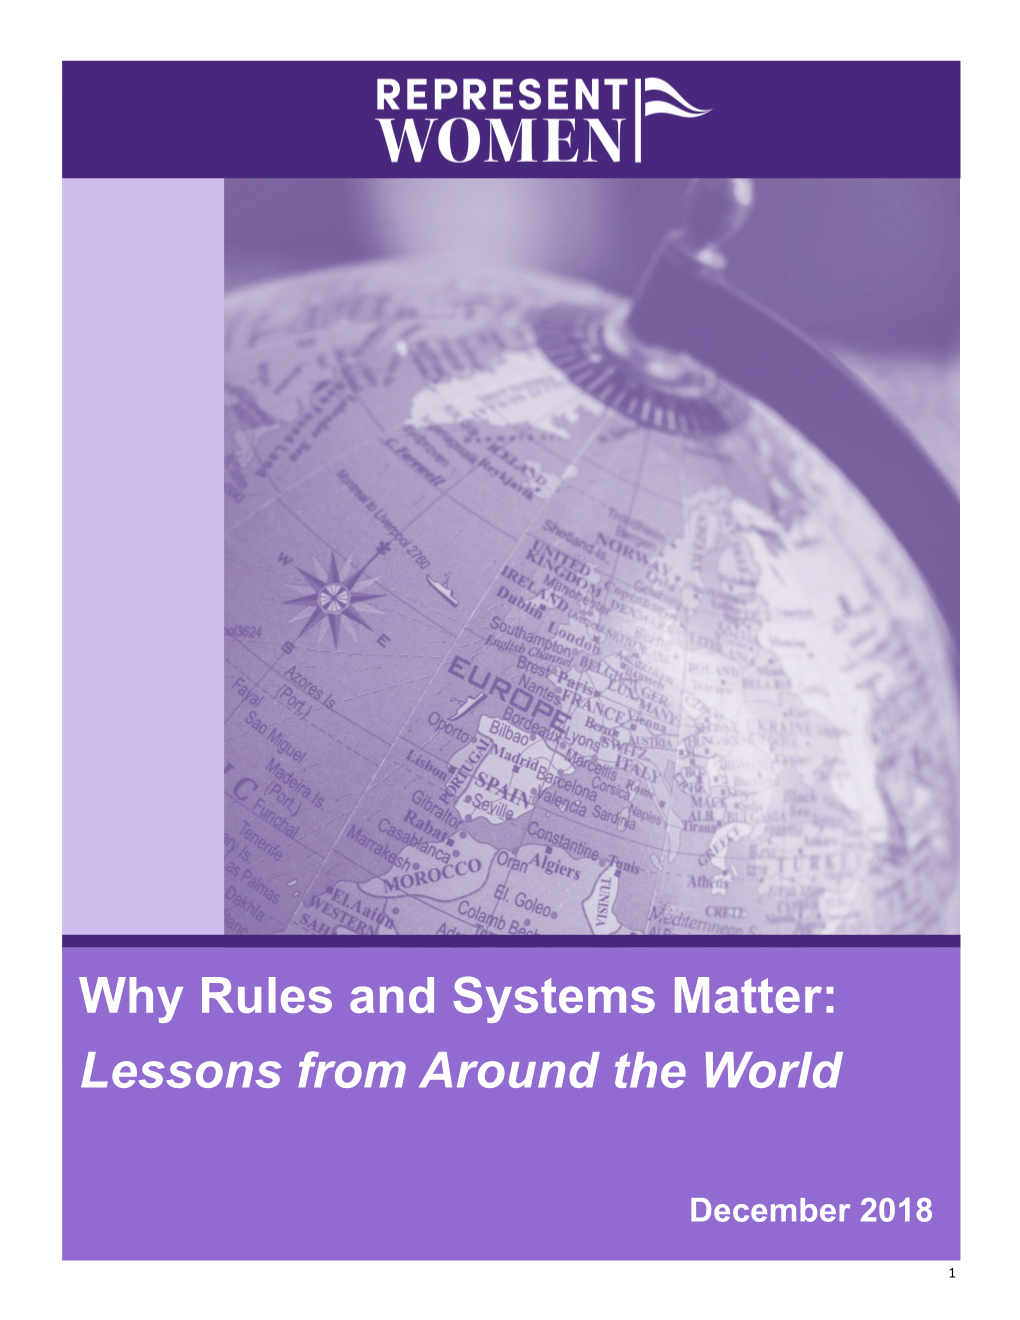 Why Rules and Systems Matter: Lessons from Around the World